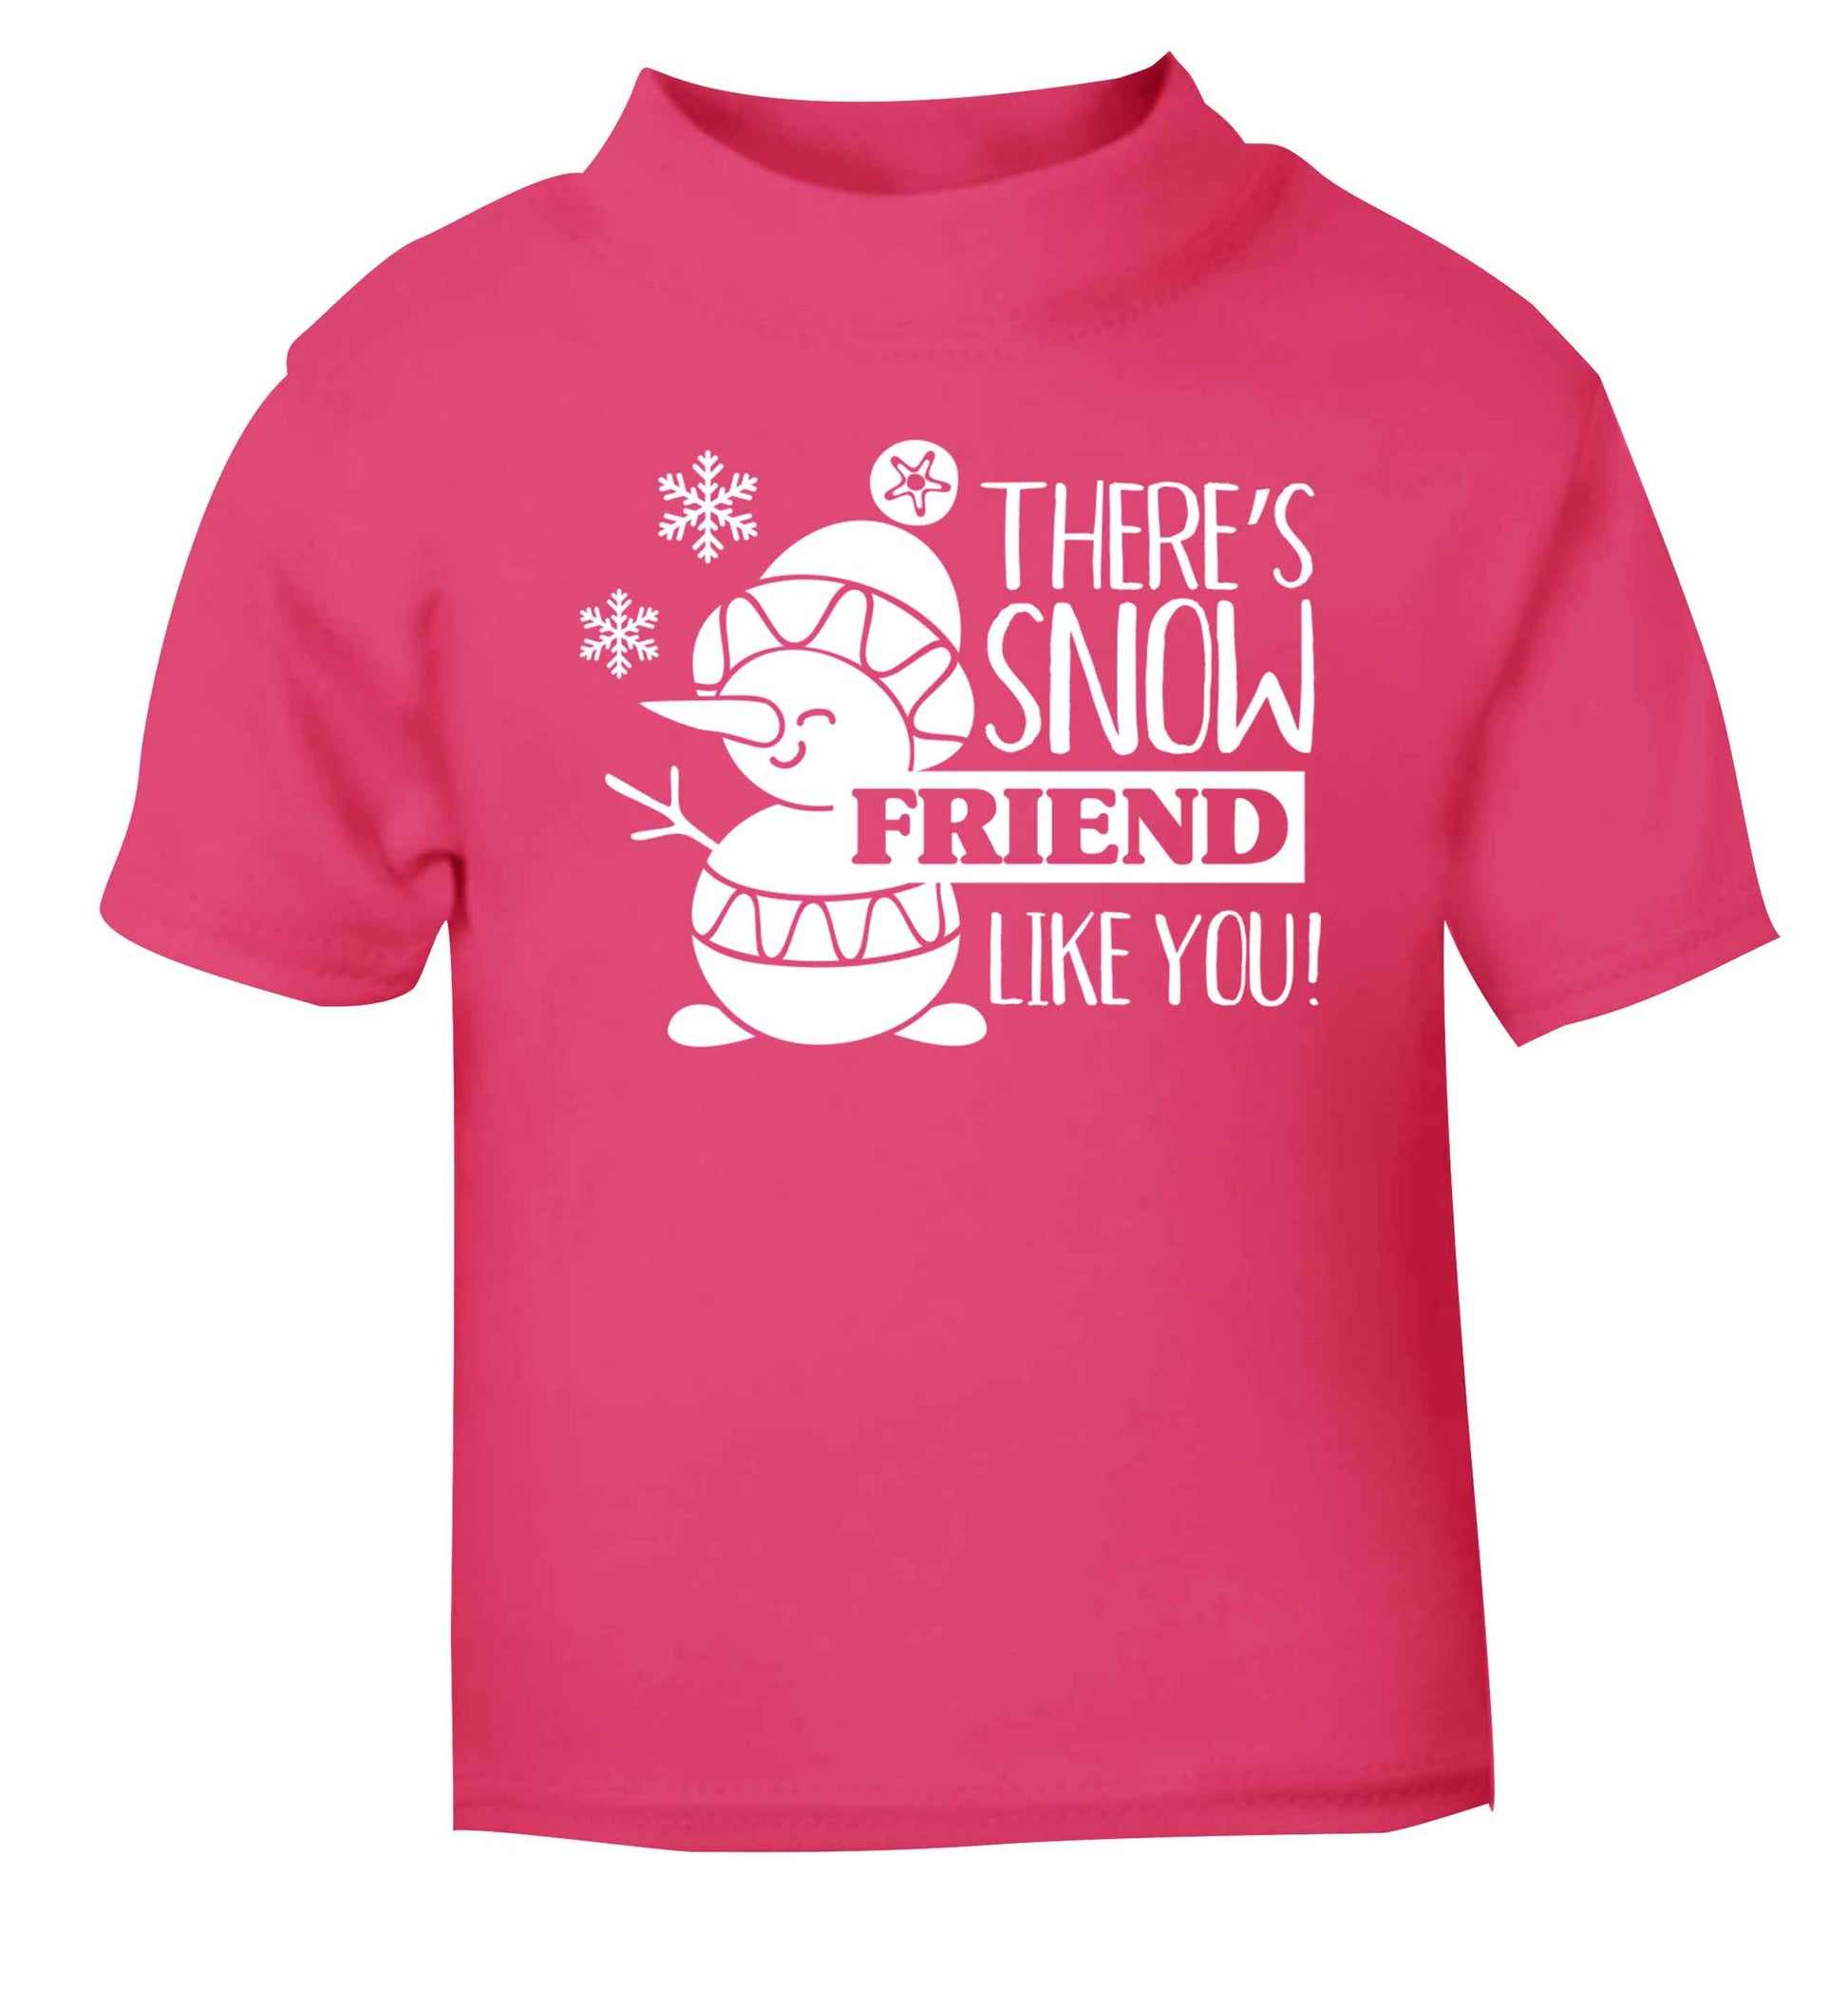 There's snow friend like you pink baby toddler Tshirt 2 Years